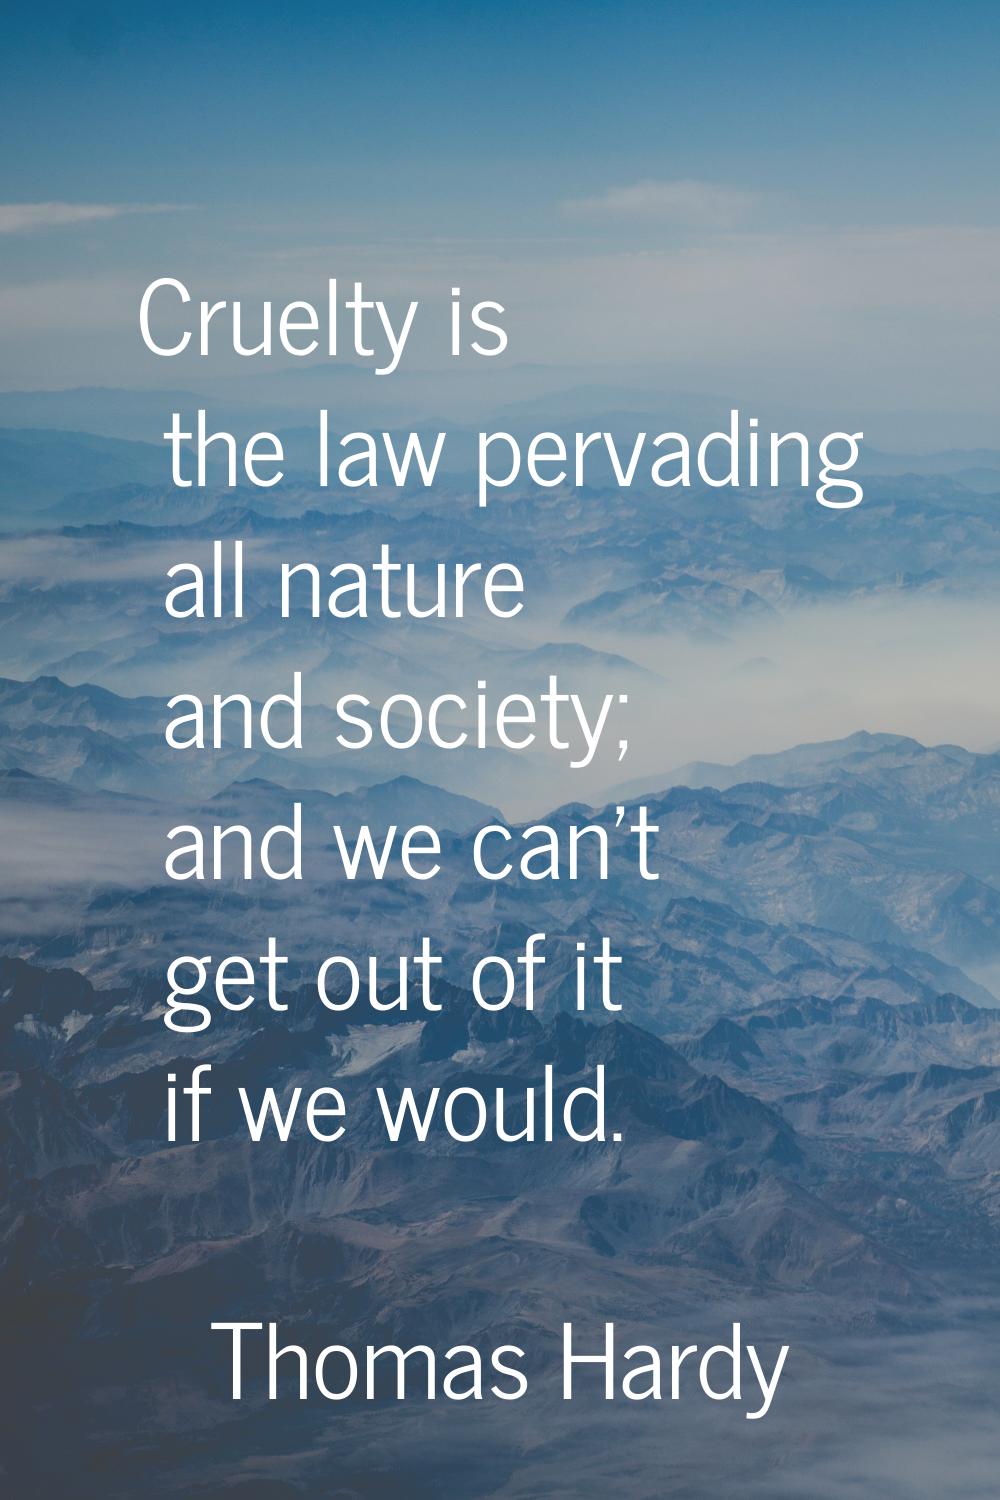 Cruelty is the law pervading all nature and society; and we can't get out of it if we would.